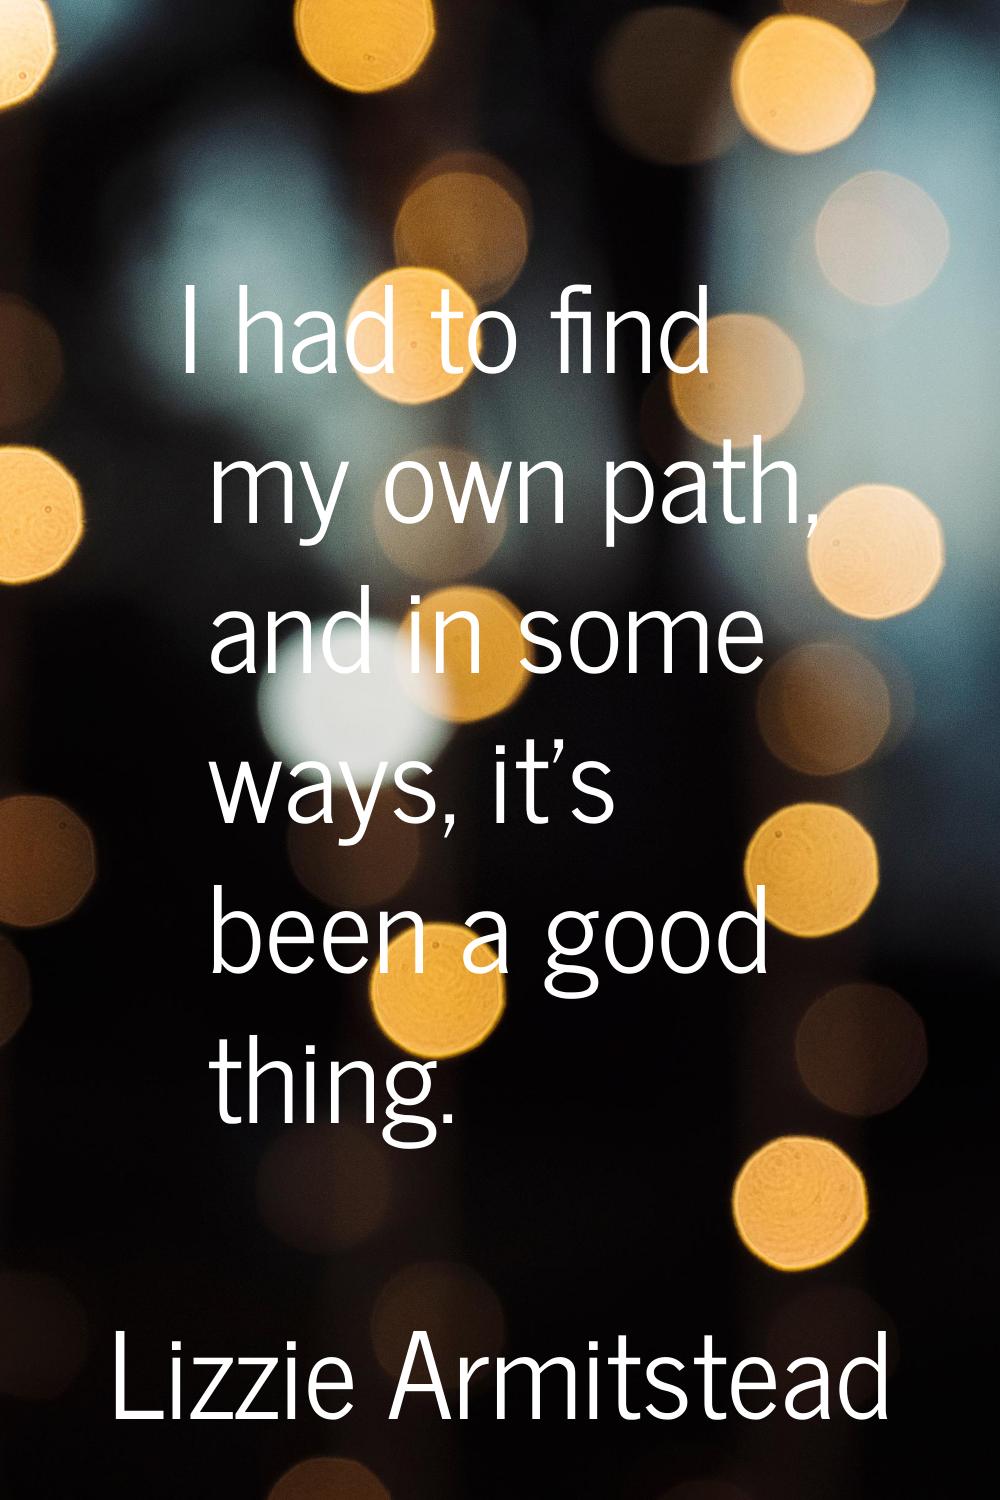 I had to find my own path, and in some ways, it's been a good thing.